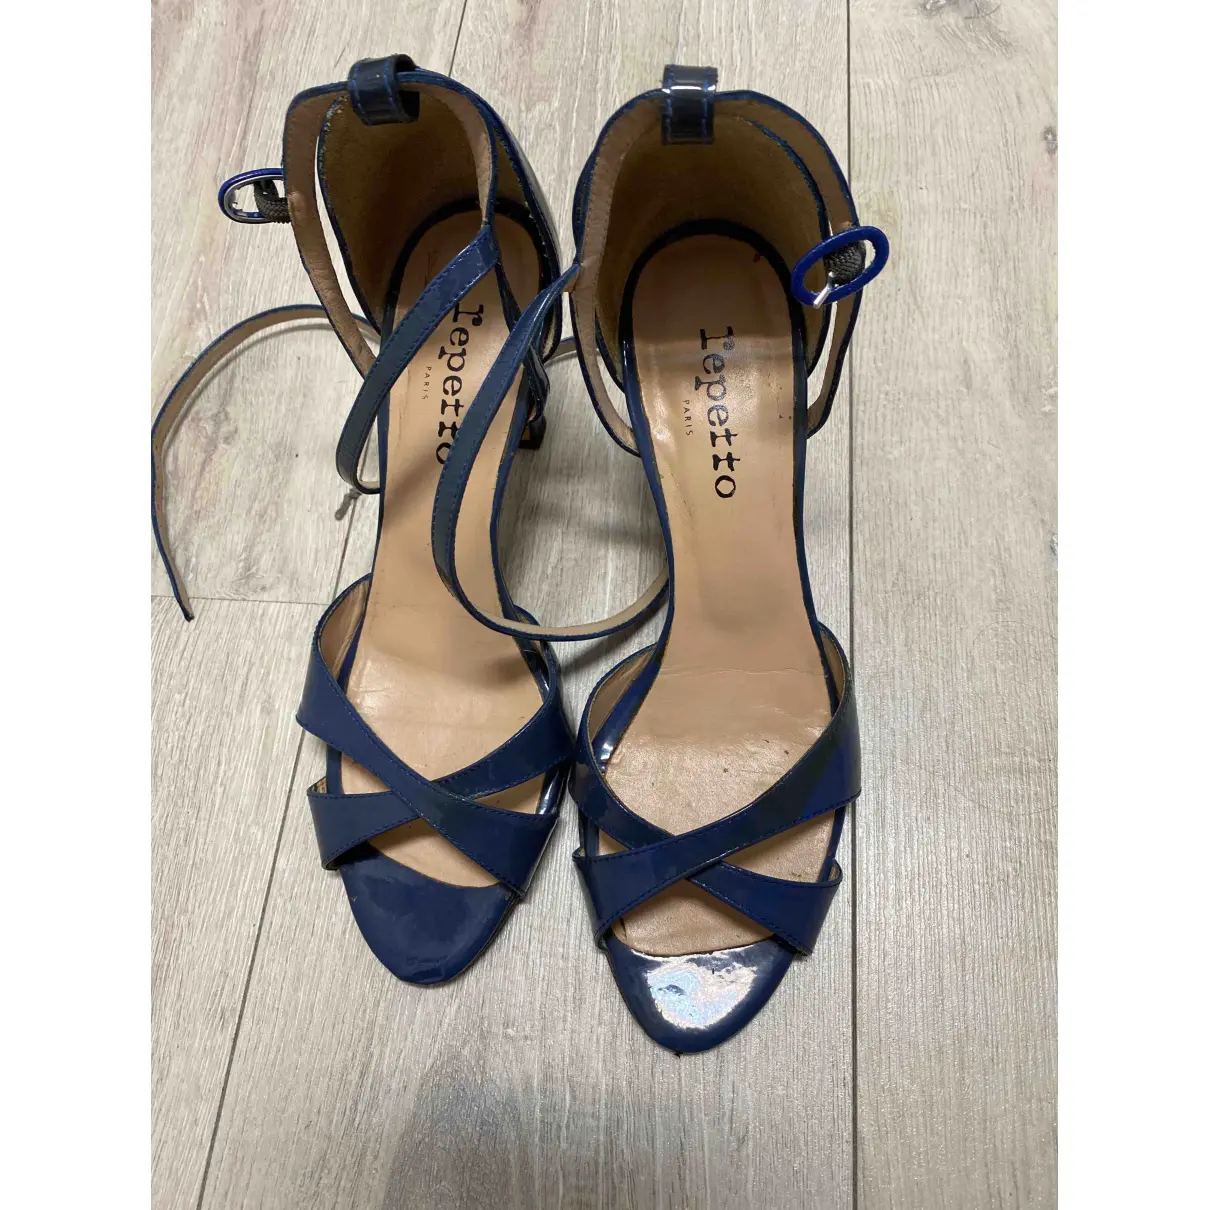 Buy Repetto Patent leather sandals online